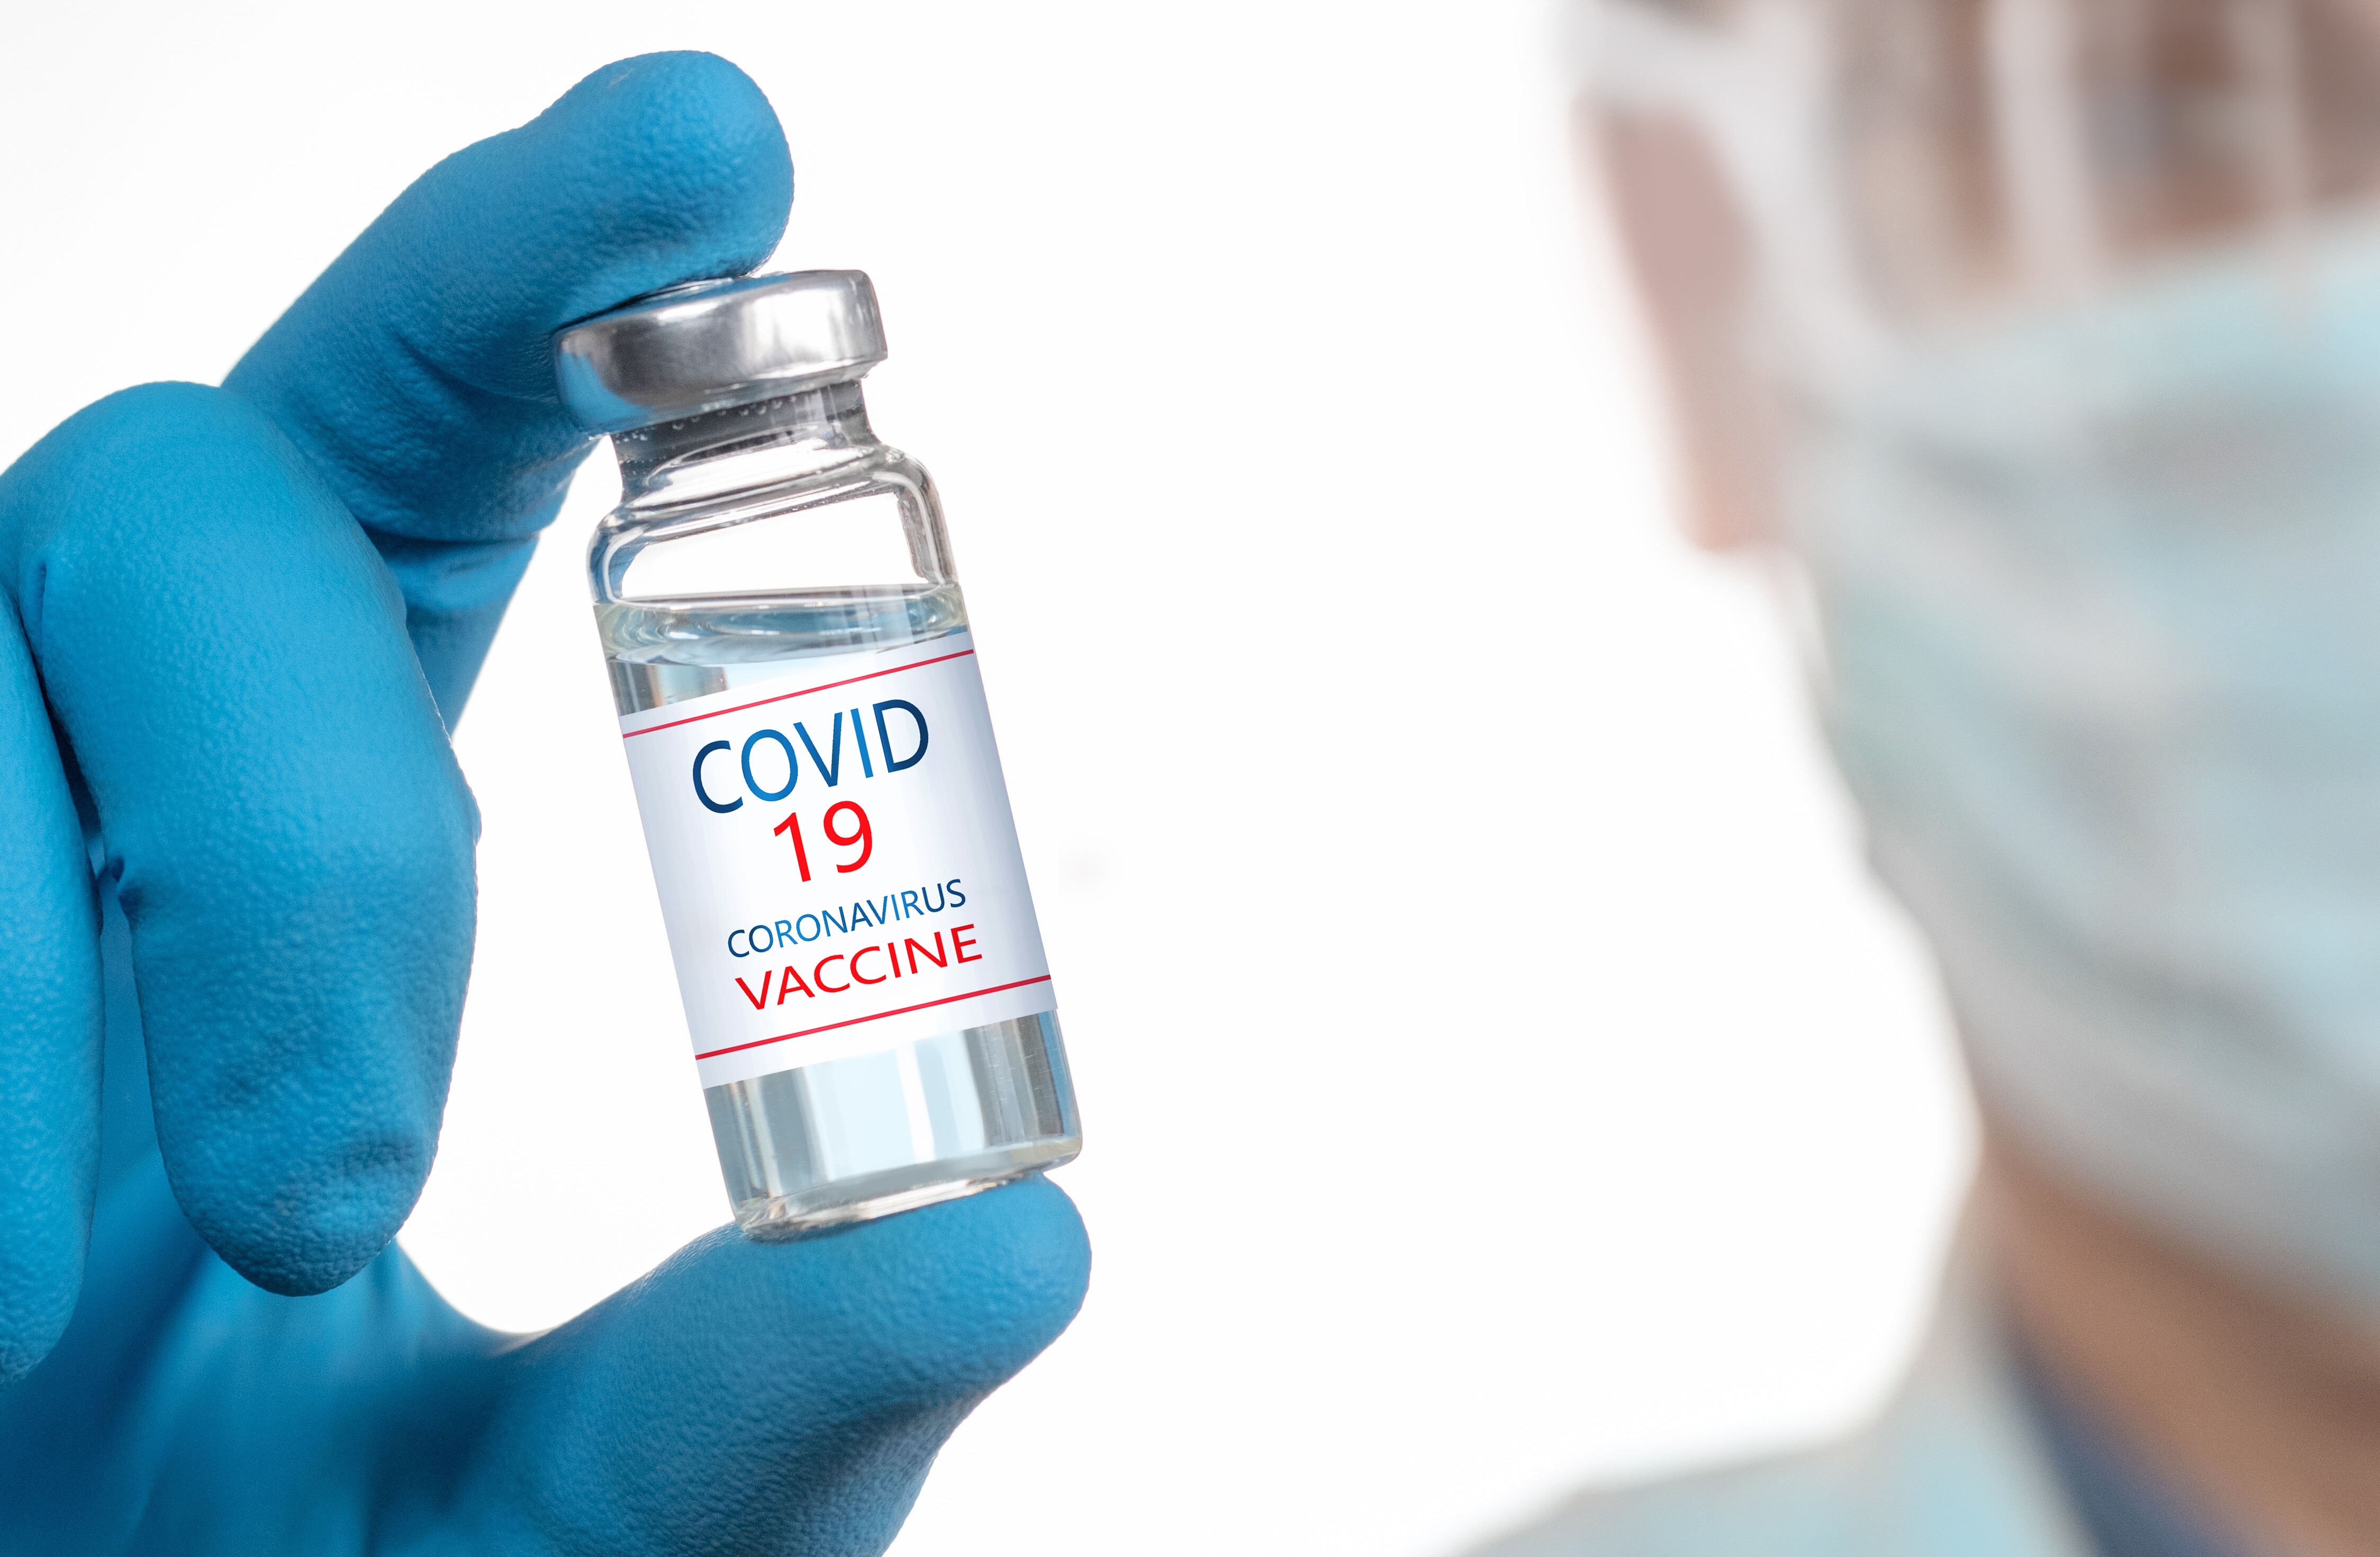 Collective efforts from vaccine developers, scientists and the media will be needed to inform vaccine sceptics to support higher take-up rates, said Ugur Sahin. Photo: Shutterstock